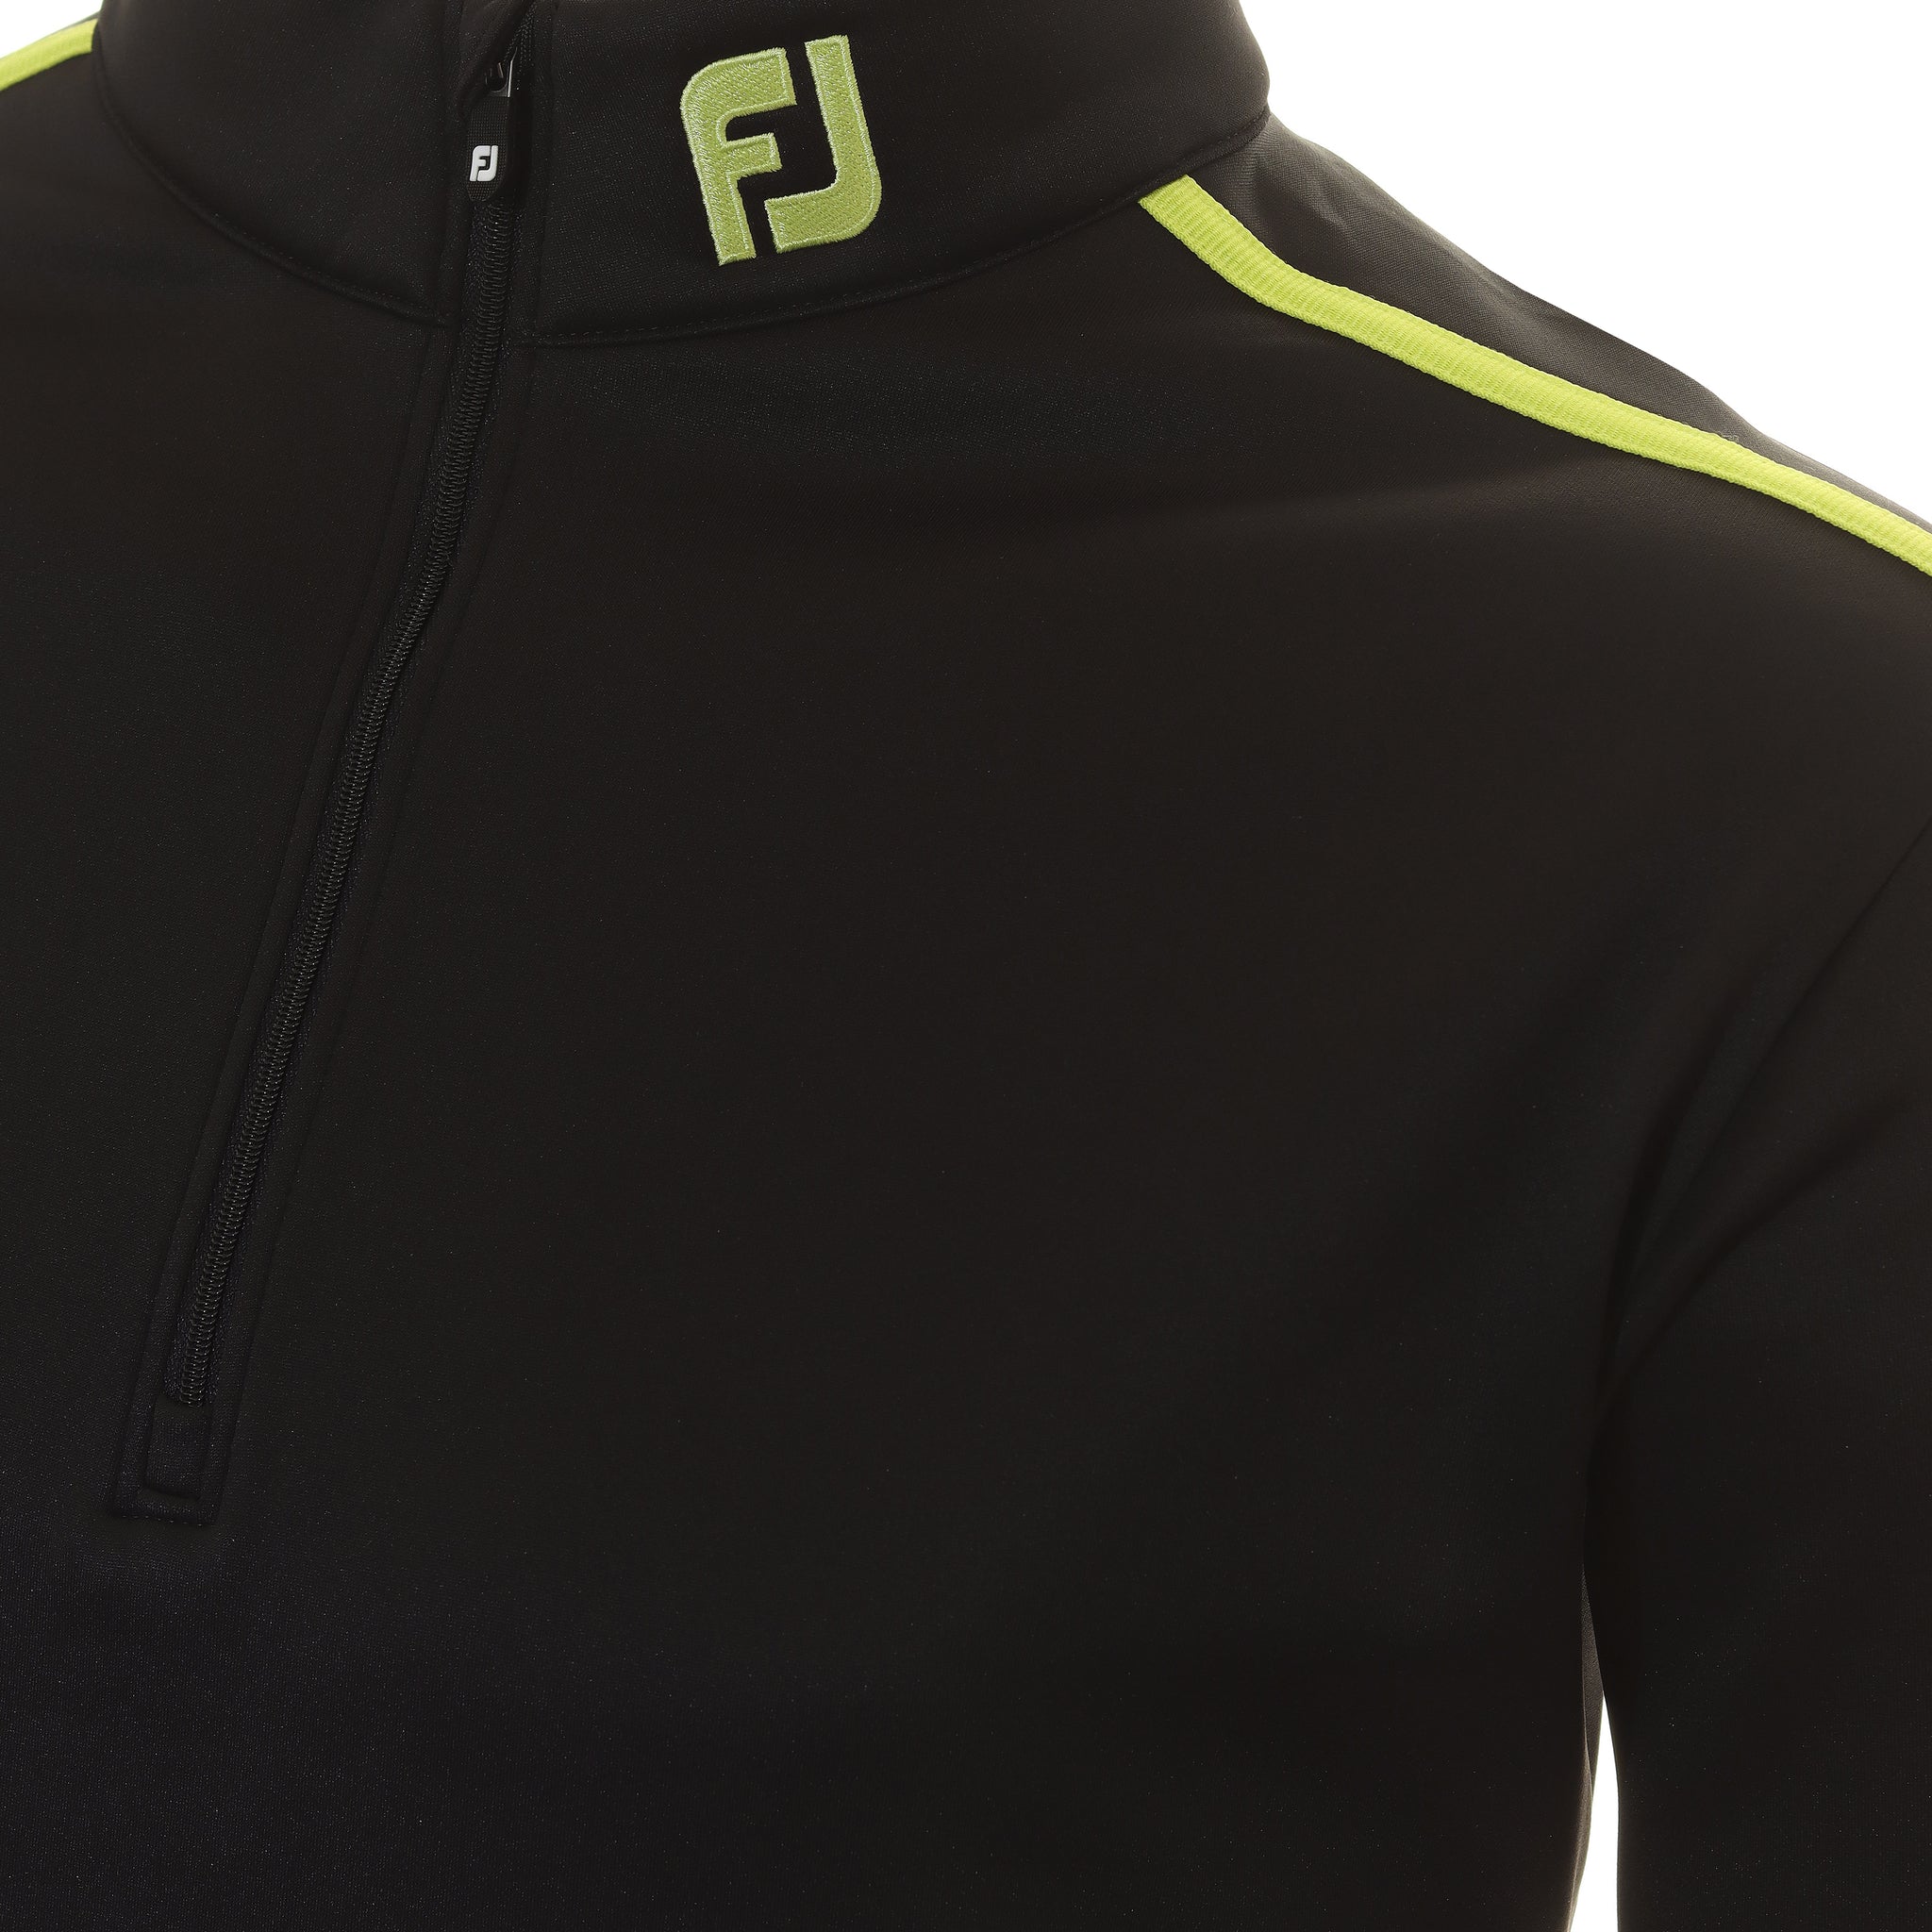 footjoy-jersey-solid-chill-out-pullover-89914-black-acid-green